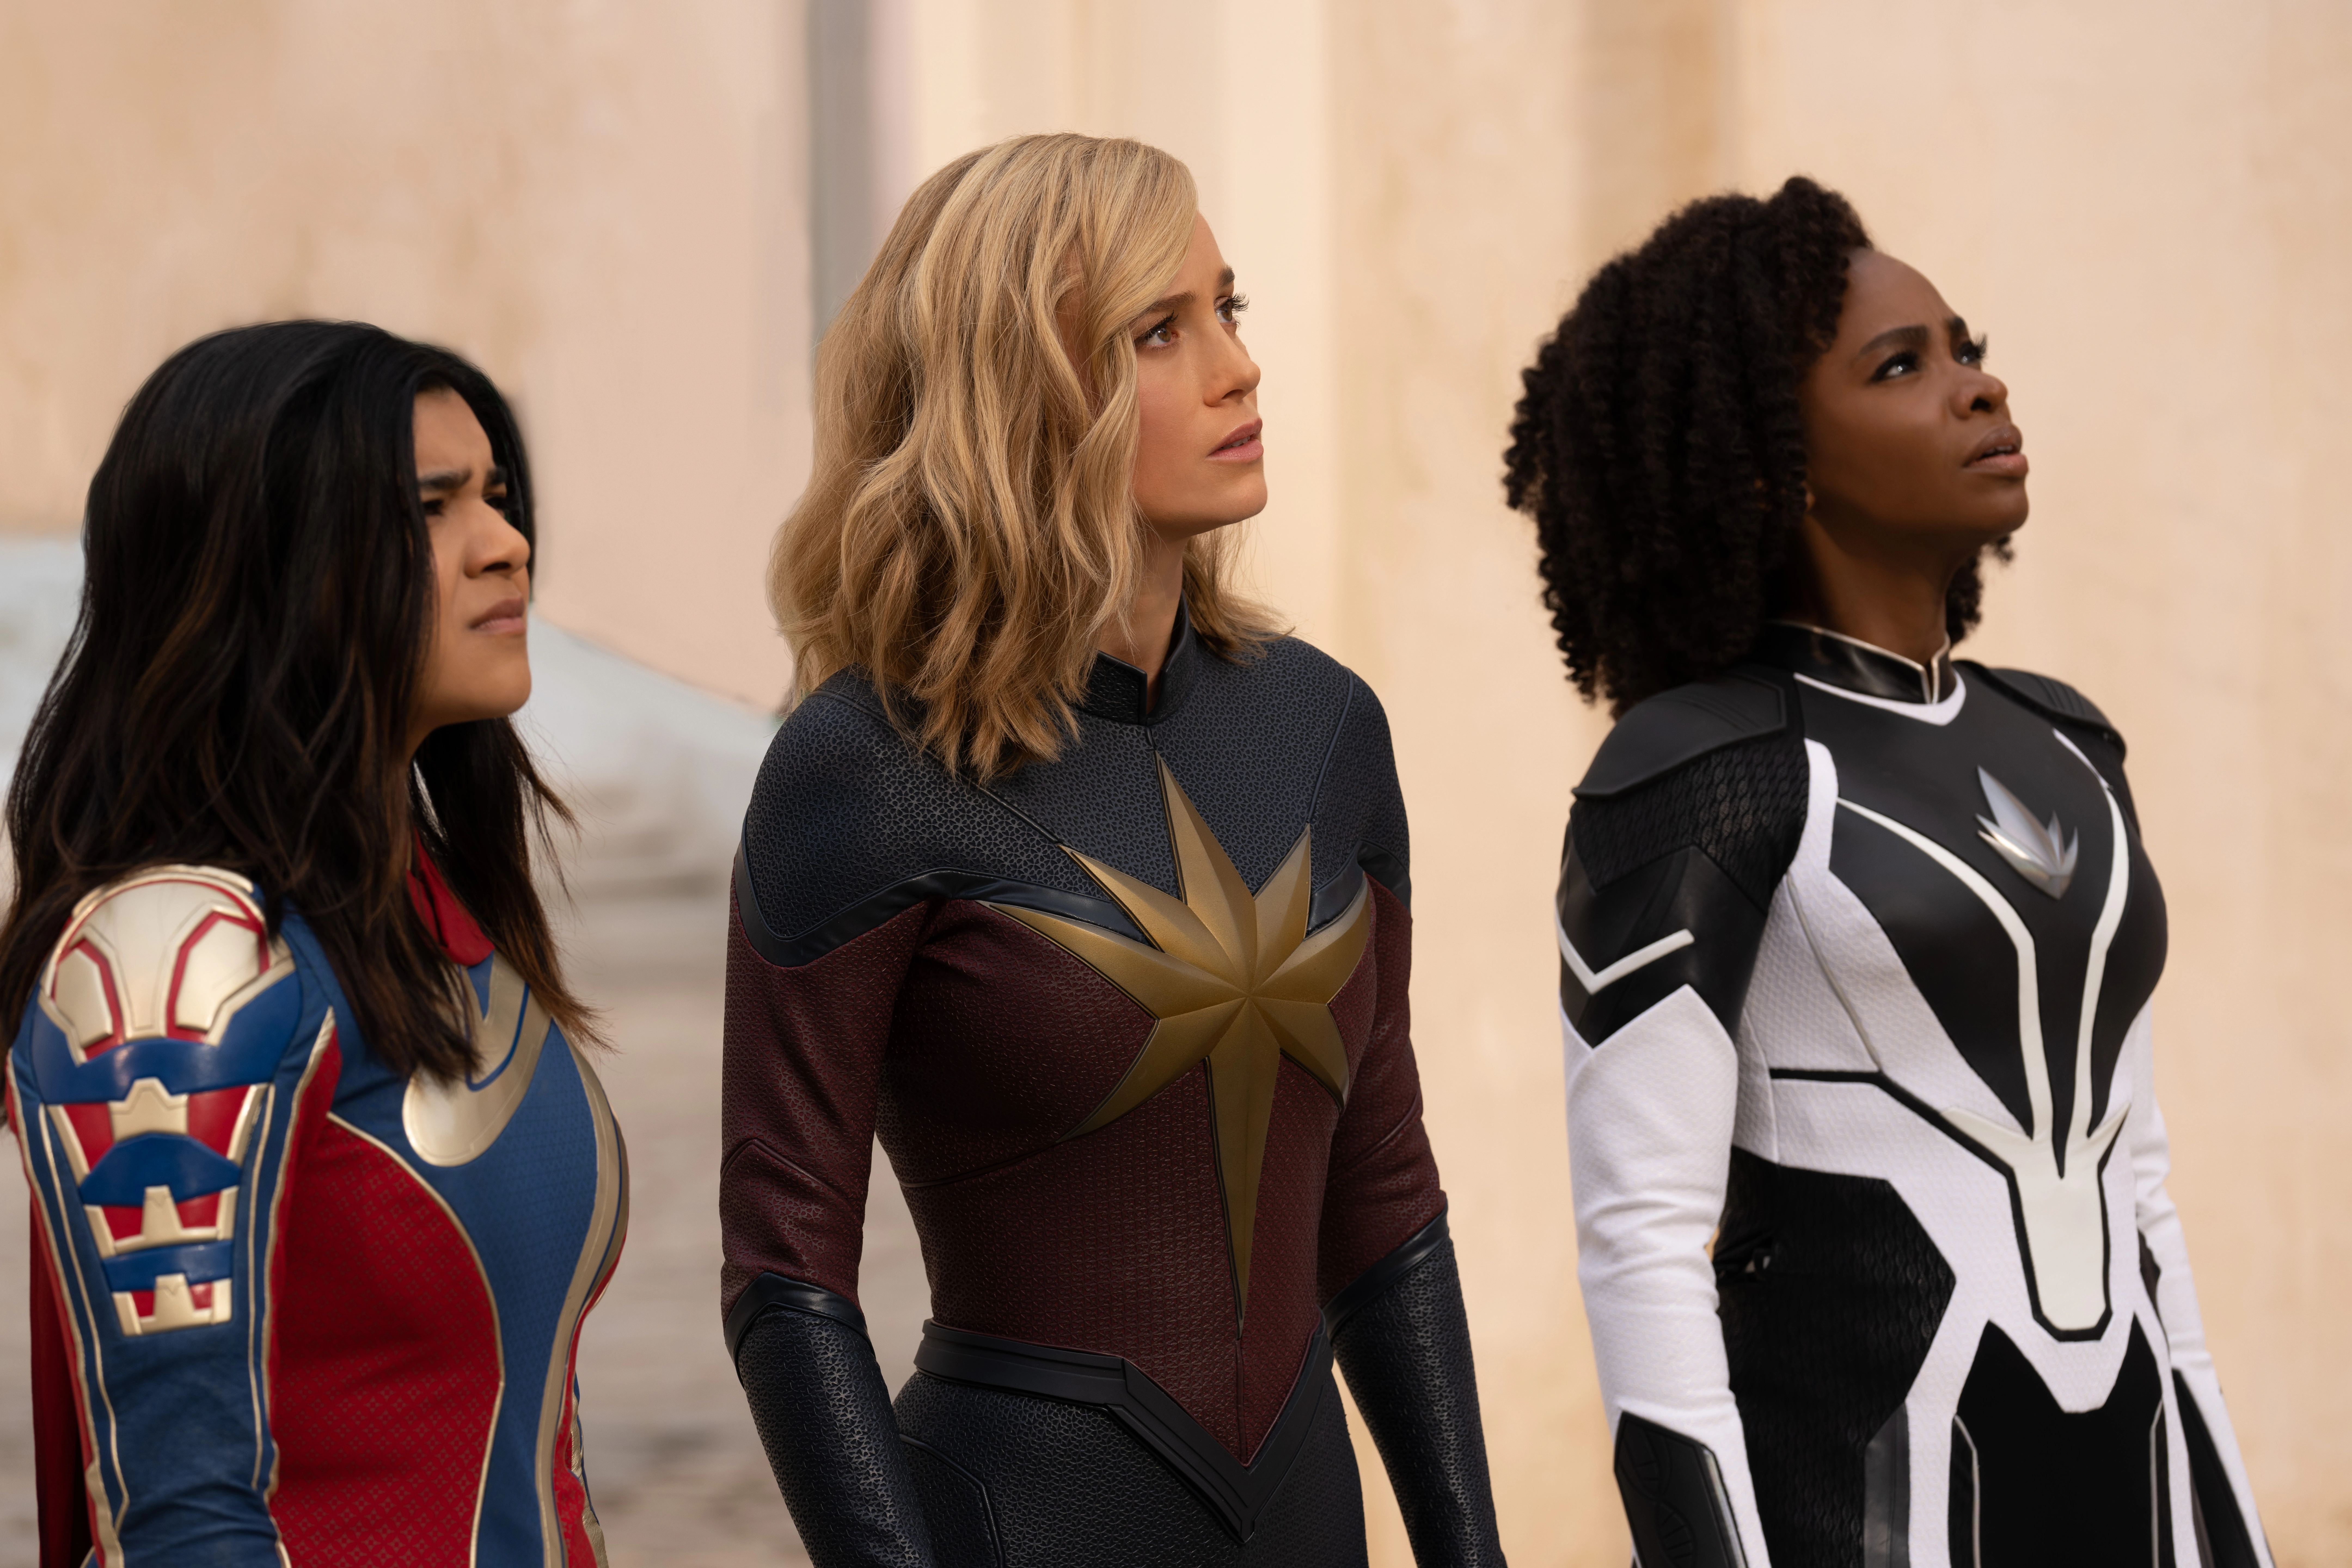 Iman Vellani, Brie Larson, and Teyonah Parris in The Marvels.